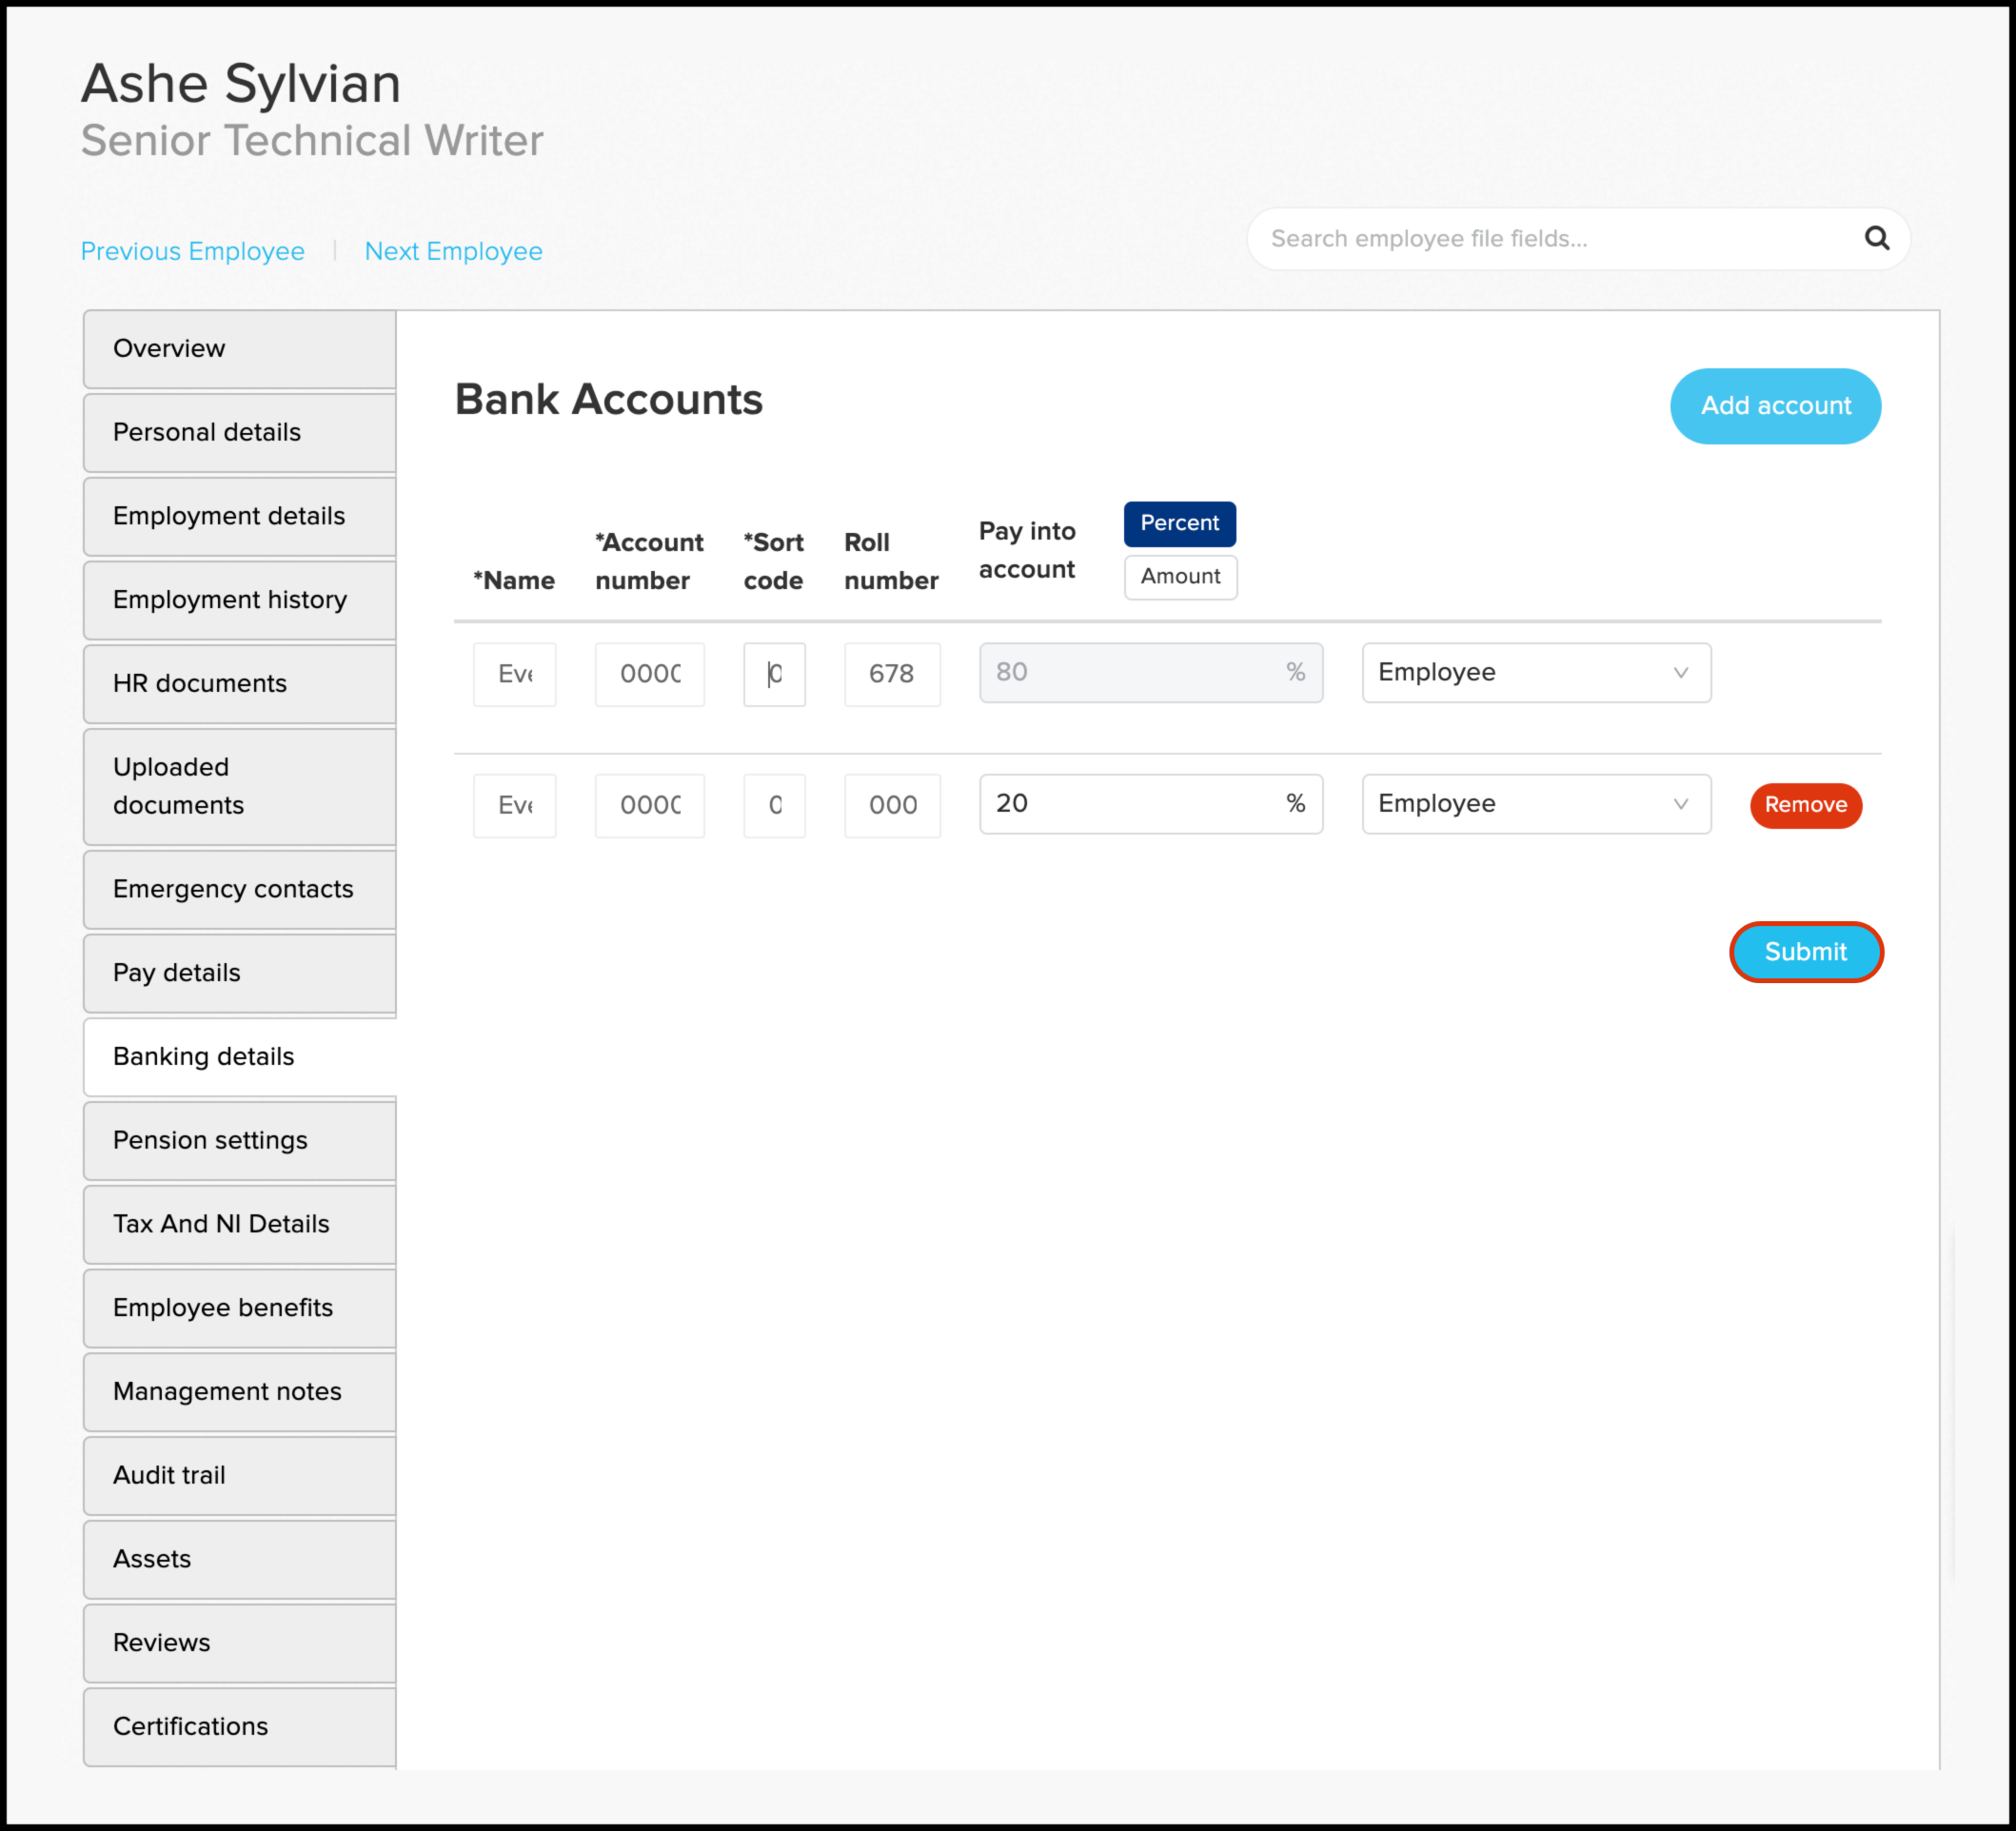 screenshot of banking details page for employee ashe sylvian in the main screen module it reads bank accounts, add account, the fields to enter the account options, a remove button next to any saved accounts and then a save button for any changes you may make.